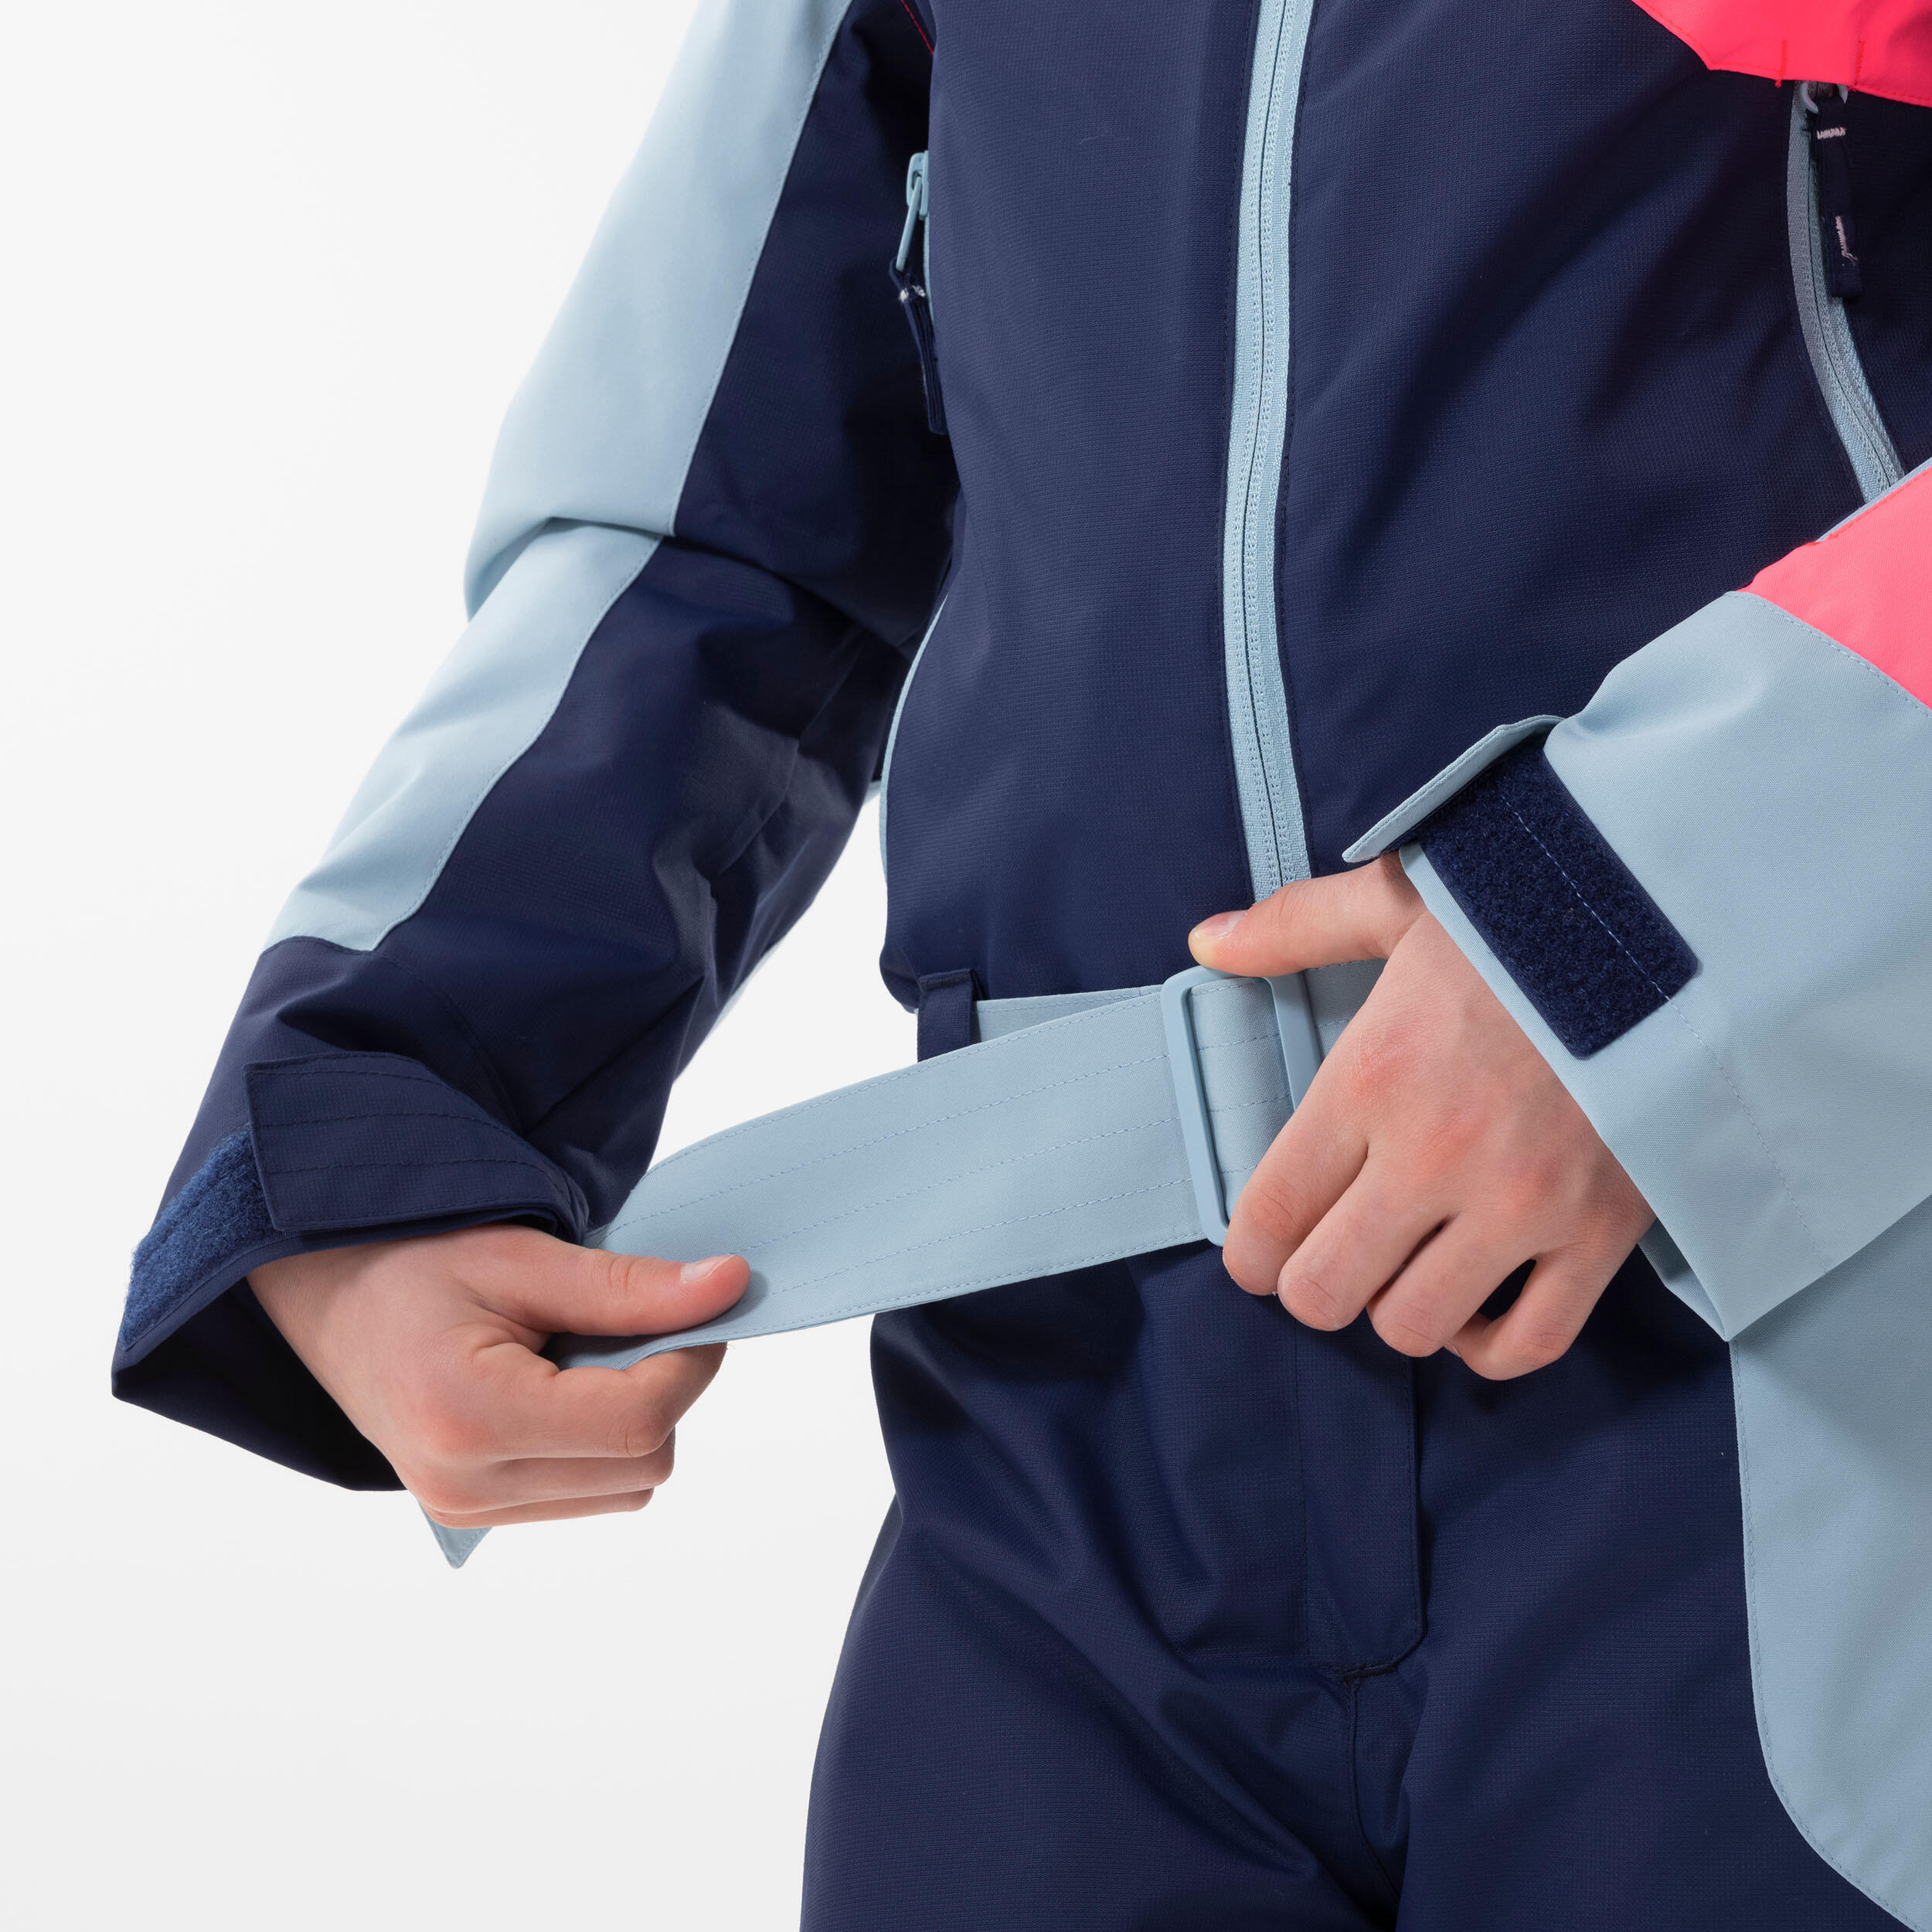 KIDS’ WARM AND WATERPROOF SKI SUIT 500 PINK AND BLUE 5/11